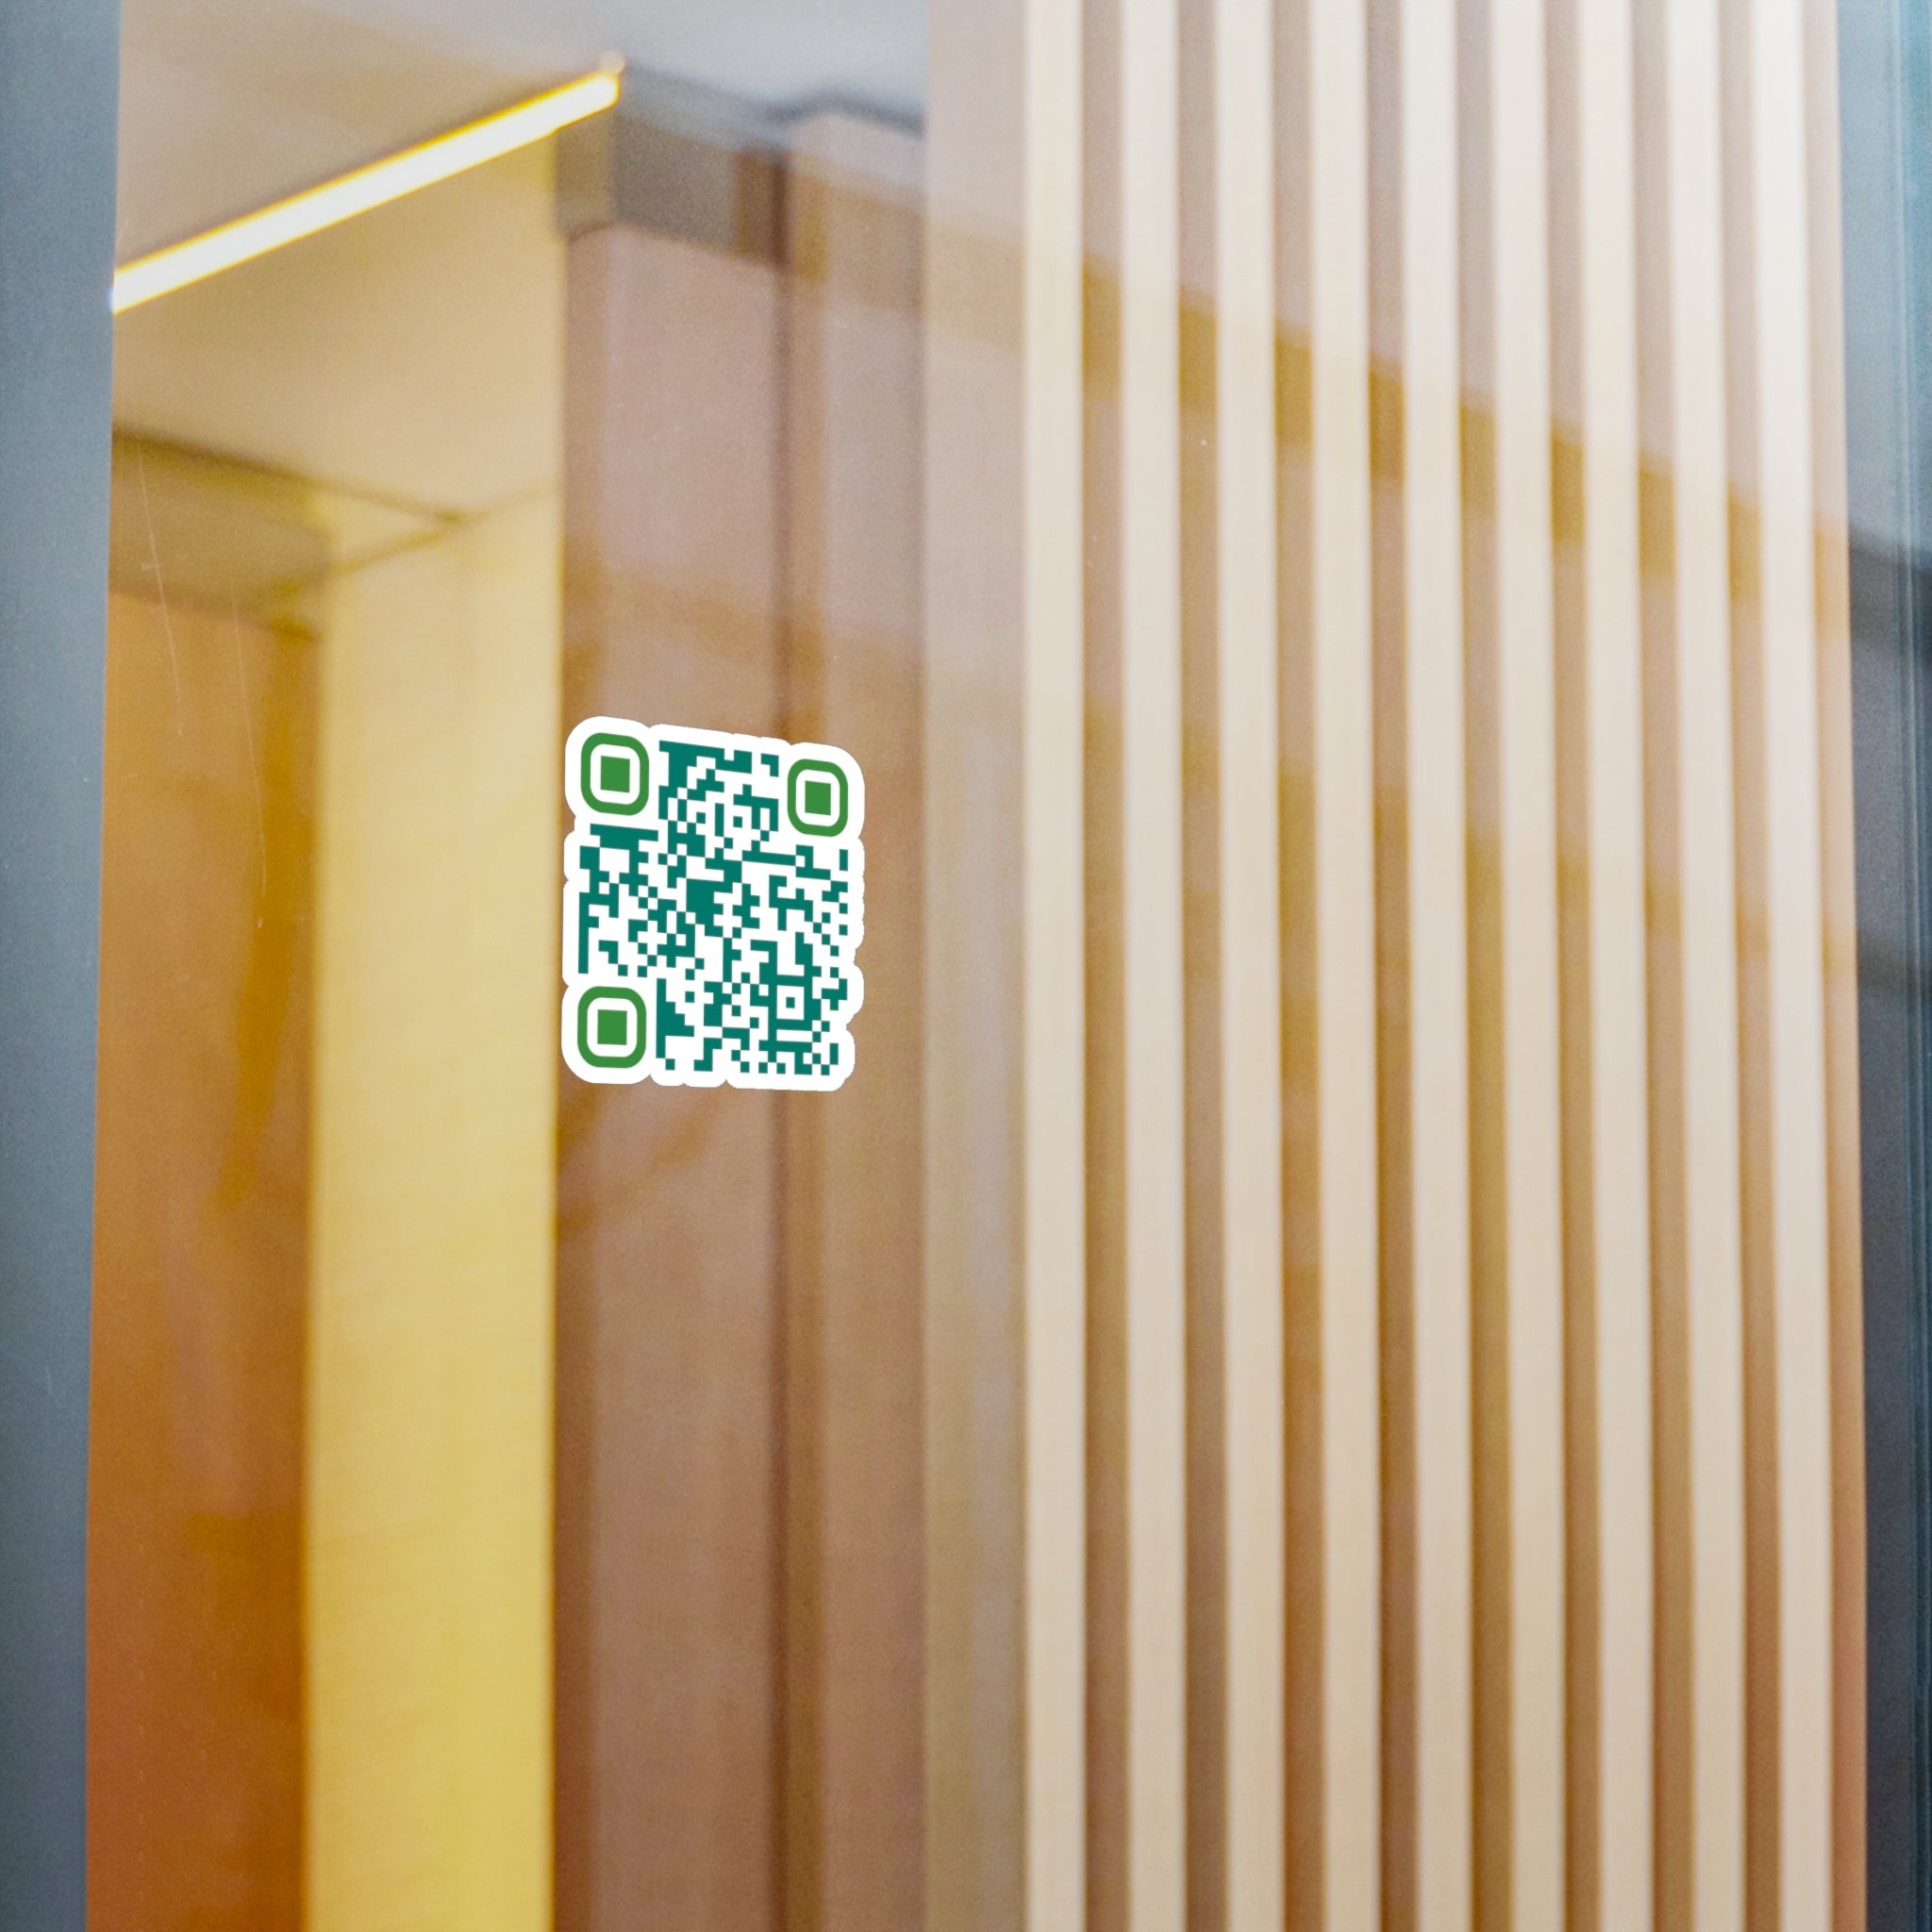 qr code sticker decal for brighten someone's day today